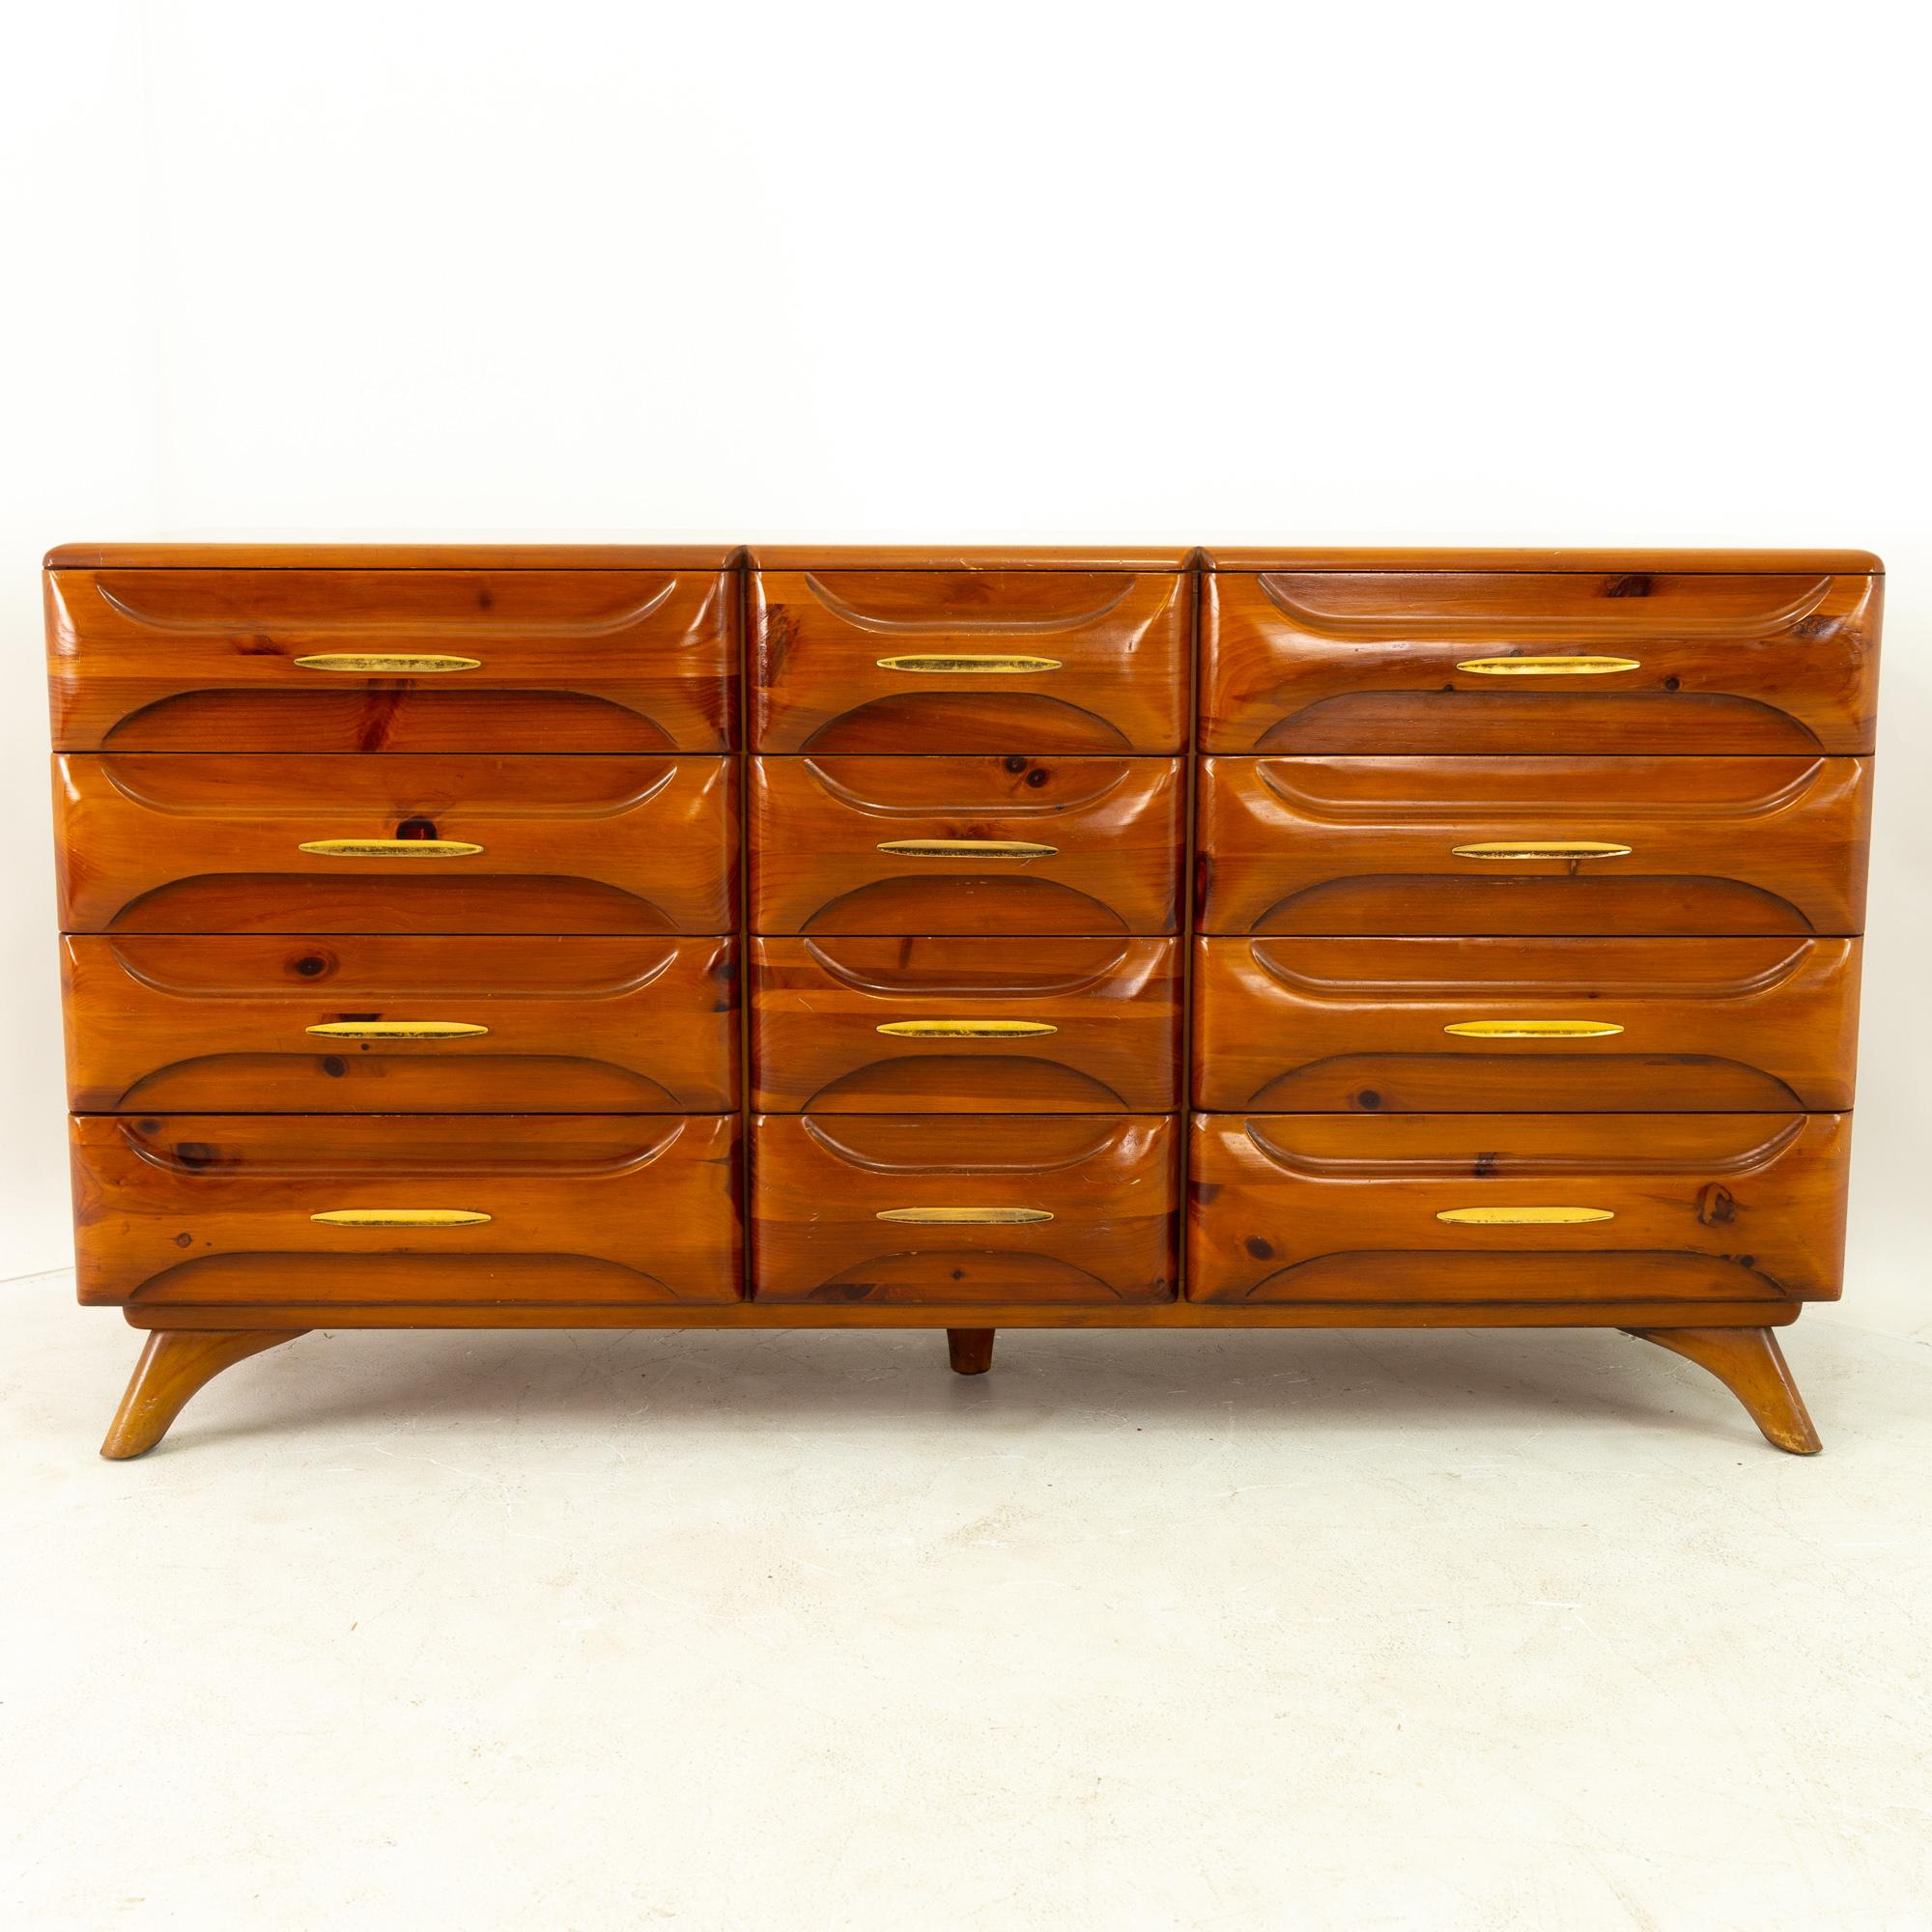 Franklin Shockey midcentury pine 12 drawer lowboy dresser
Measures: 60 wide x 19.5 deep x 31.5 inches high

This price includes getting this piece in what we call restored vintage condition. That means the piece is permanently fixed upon purchase